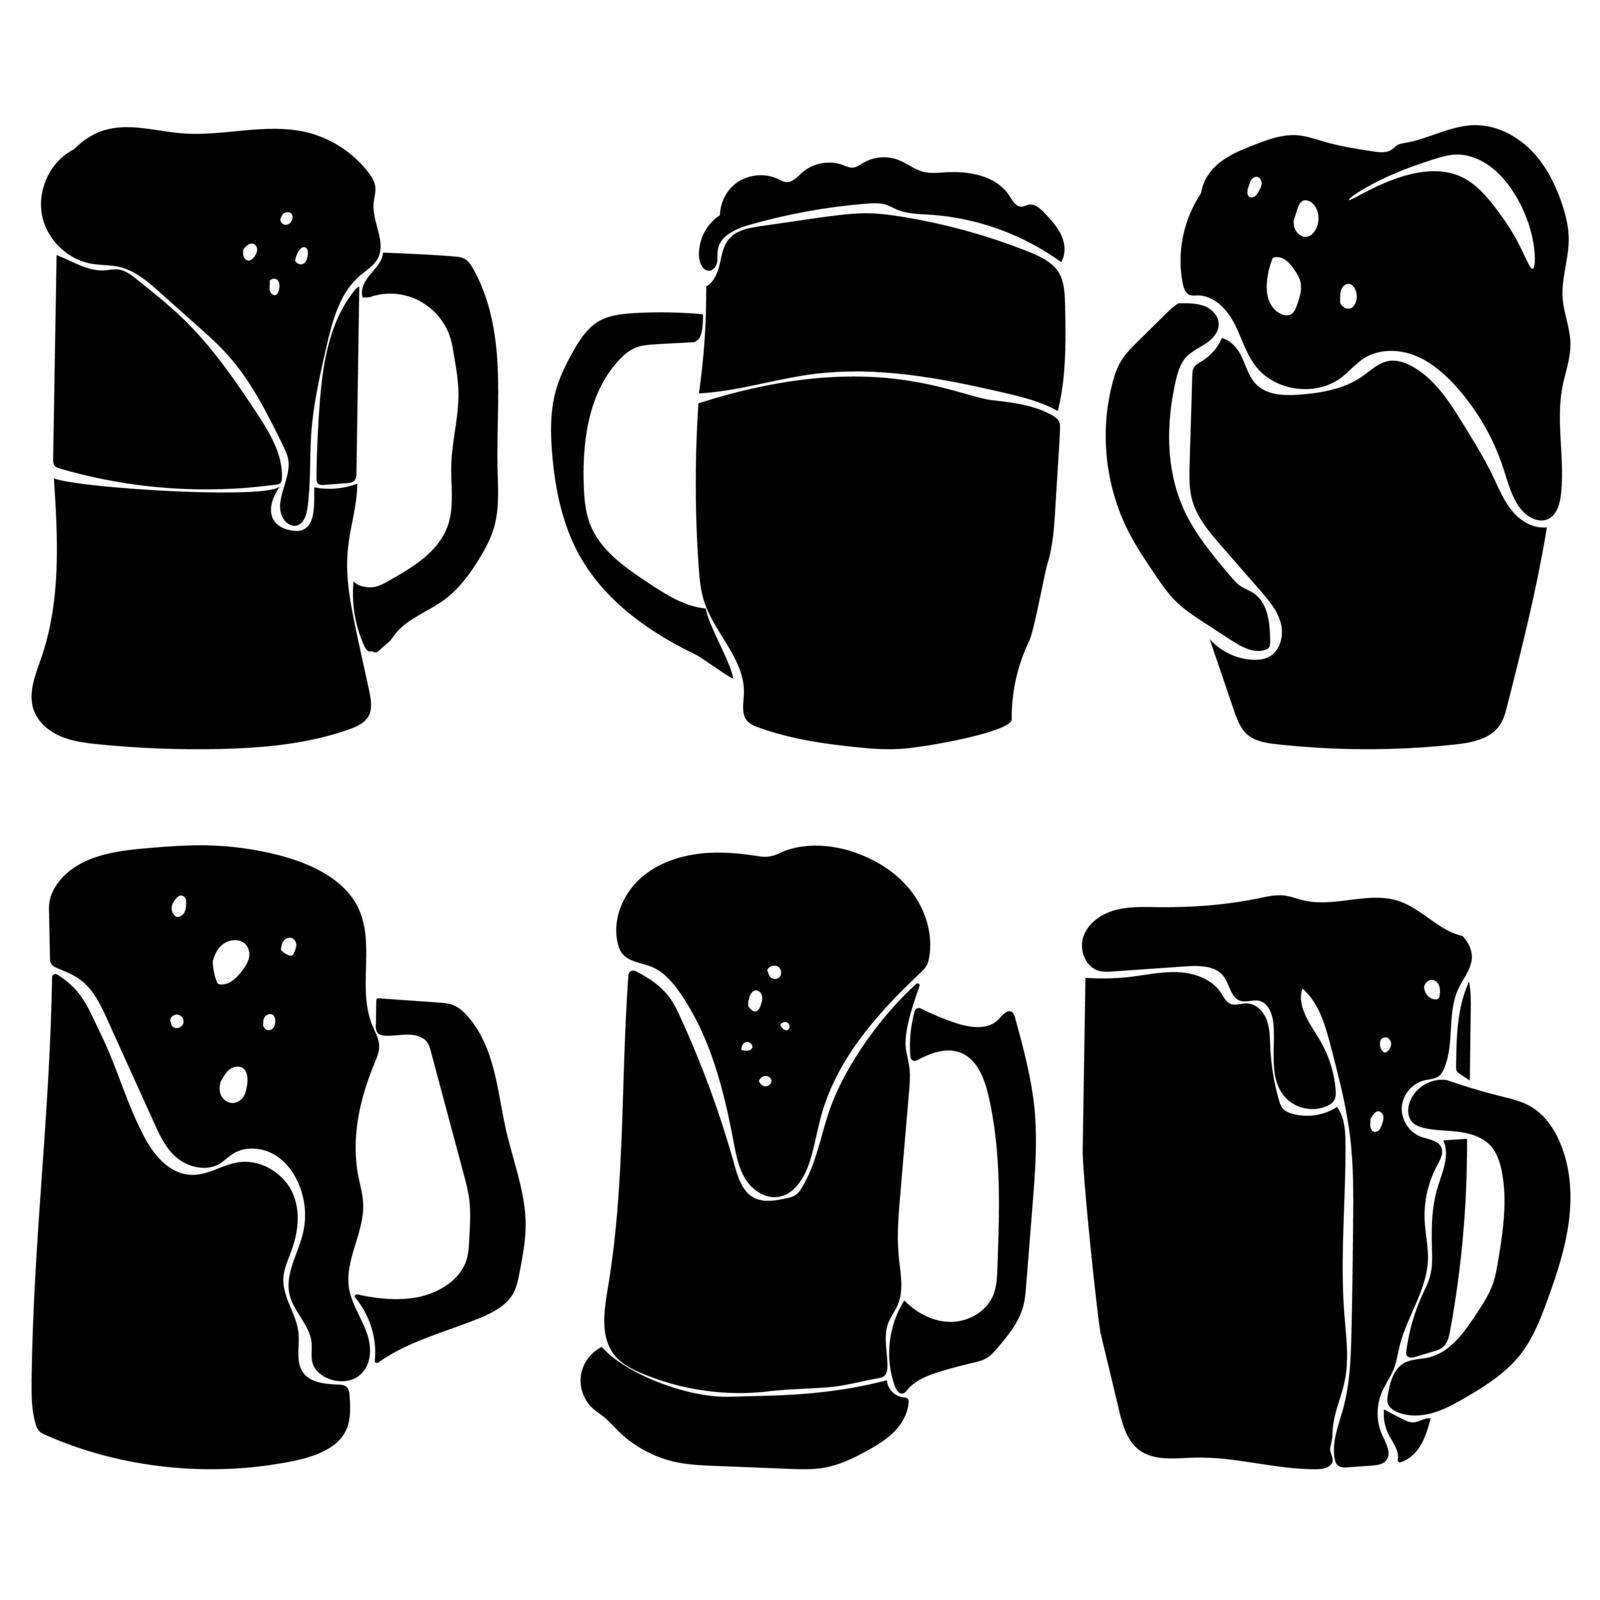 Set of silhouettes of glass mugs with beer, foamy drink in a high glass with a handle vector illustration